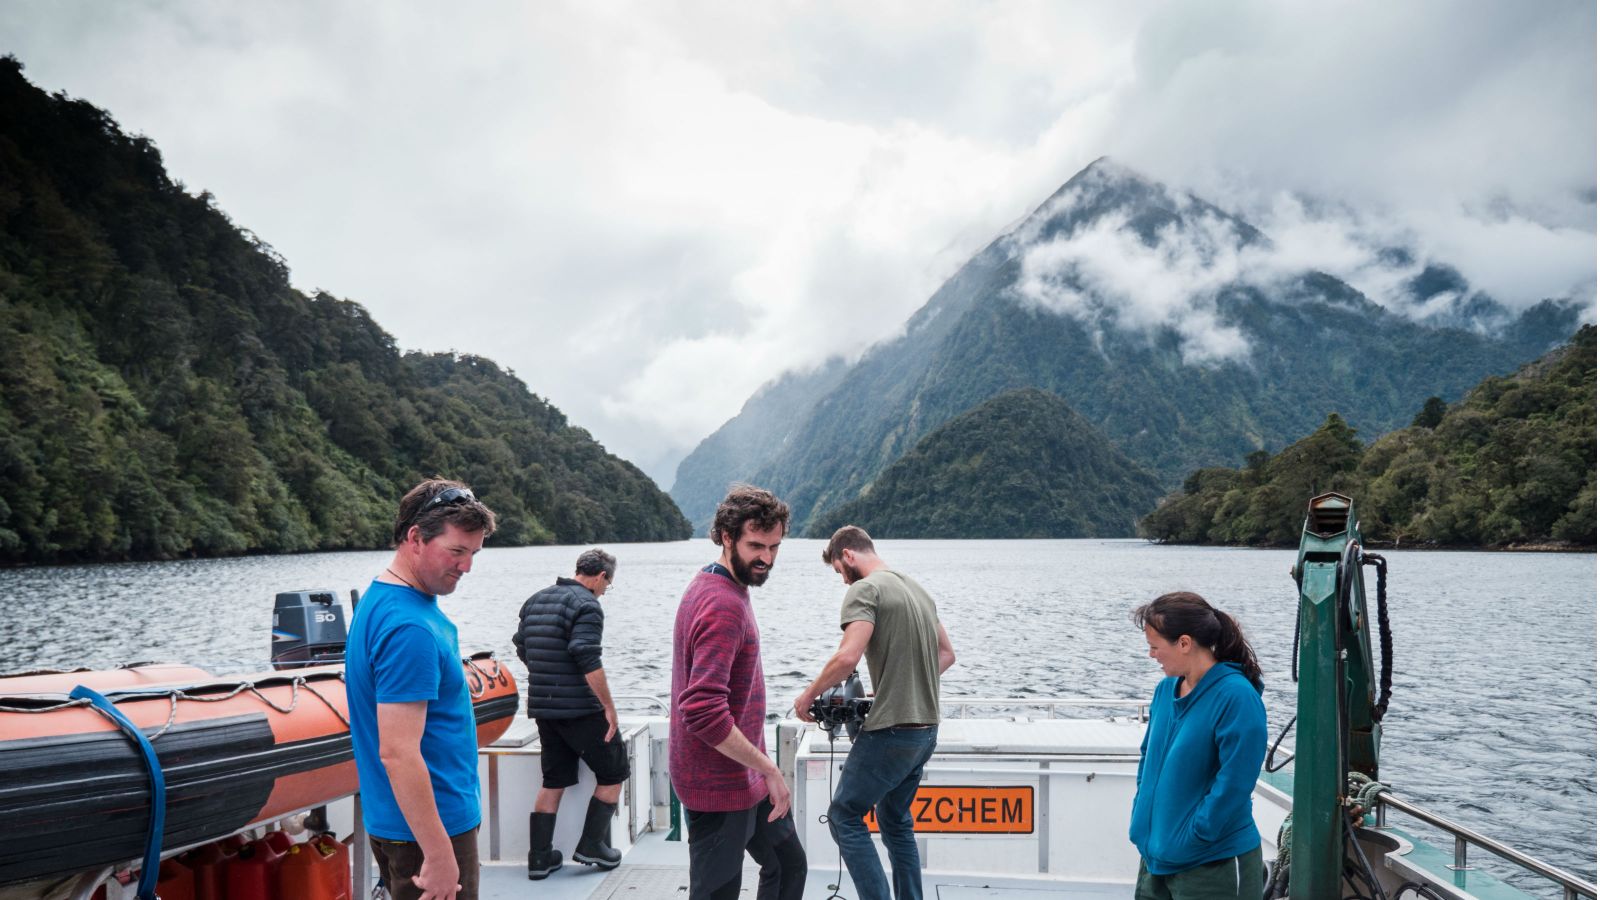 Extraordinarily beautiful and steep sided mountains, covered in a lush virgin forest, surround Professor James Bell's research crew aboard the Southern Winds vessel as they explore the serene waters of the Fiordland Marine Area, Te Moana o Atawhenua.